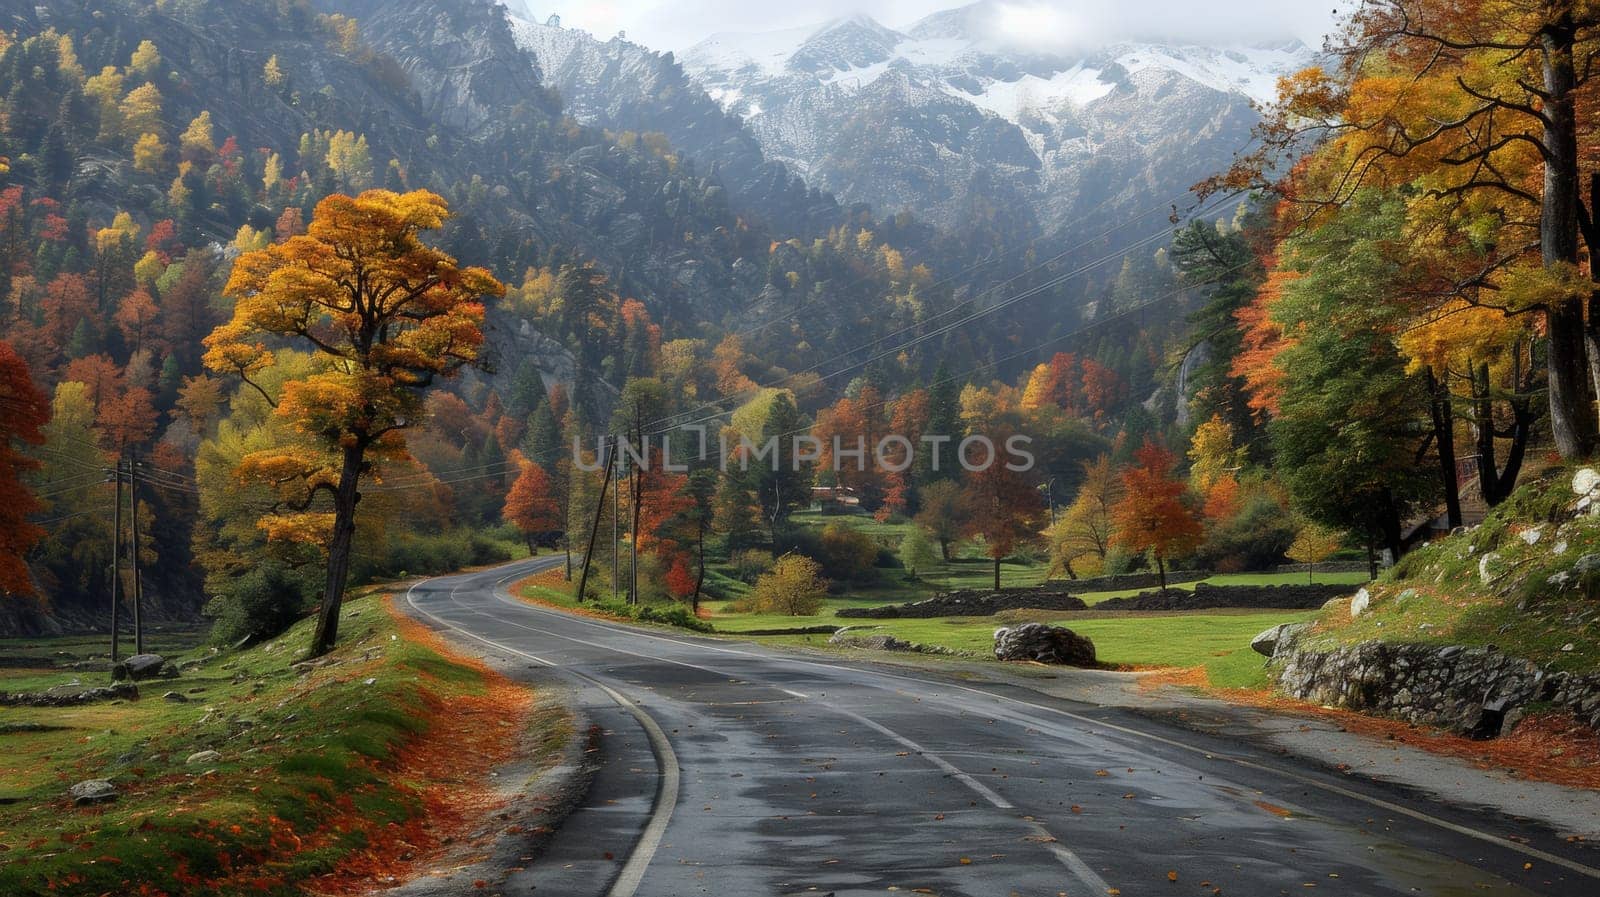 A road with trees and mountains in the background, AI by starush